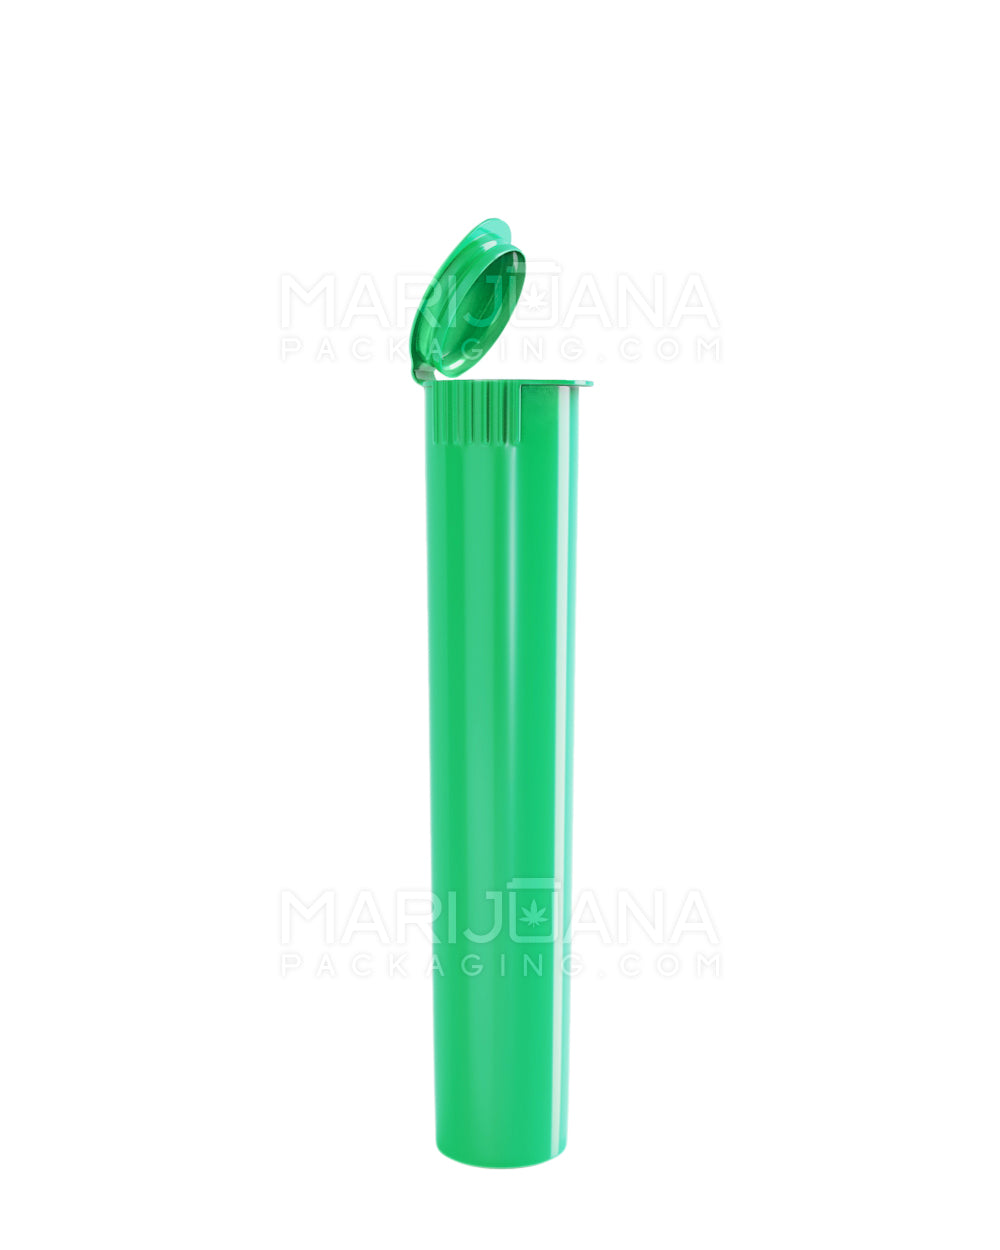 Child Resistant | Pop Top Opaque Plastic Pre-Roll Tubes | 95mm - Green - 1000 Count - 1